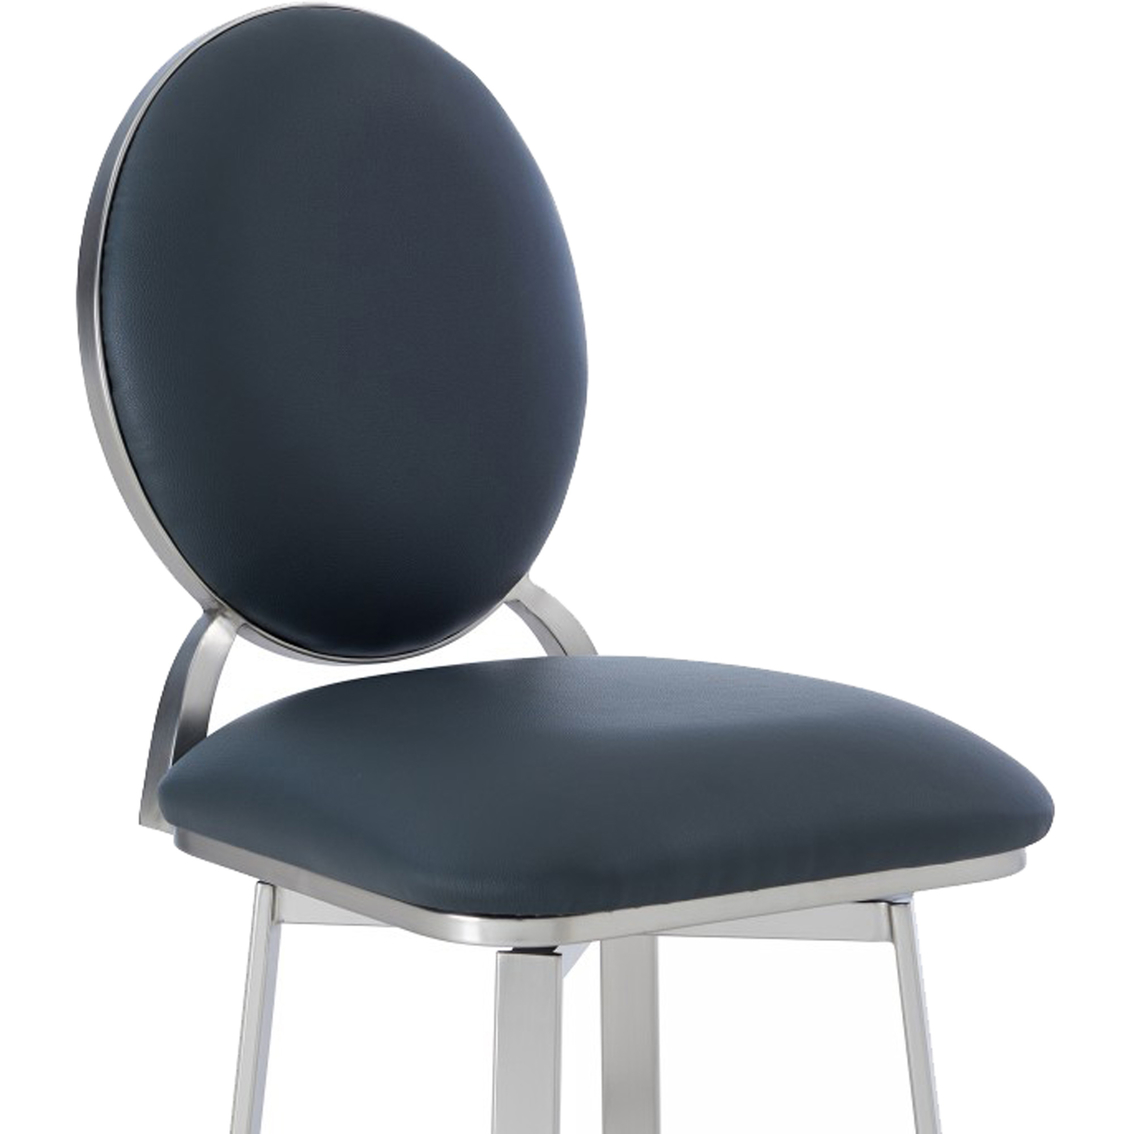 Armen Living Pia Barstool in Brushed Stainless Steel Finish and Grey Faux Leather - Image 4 of 7